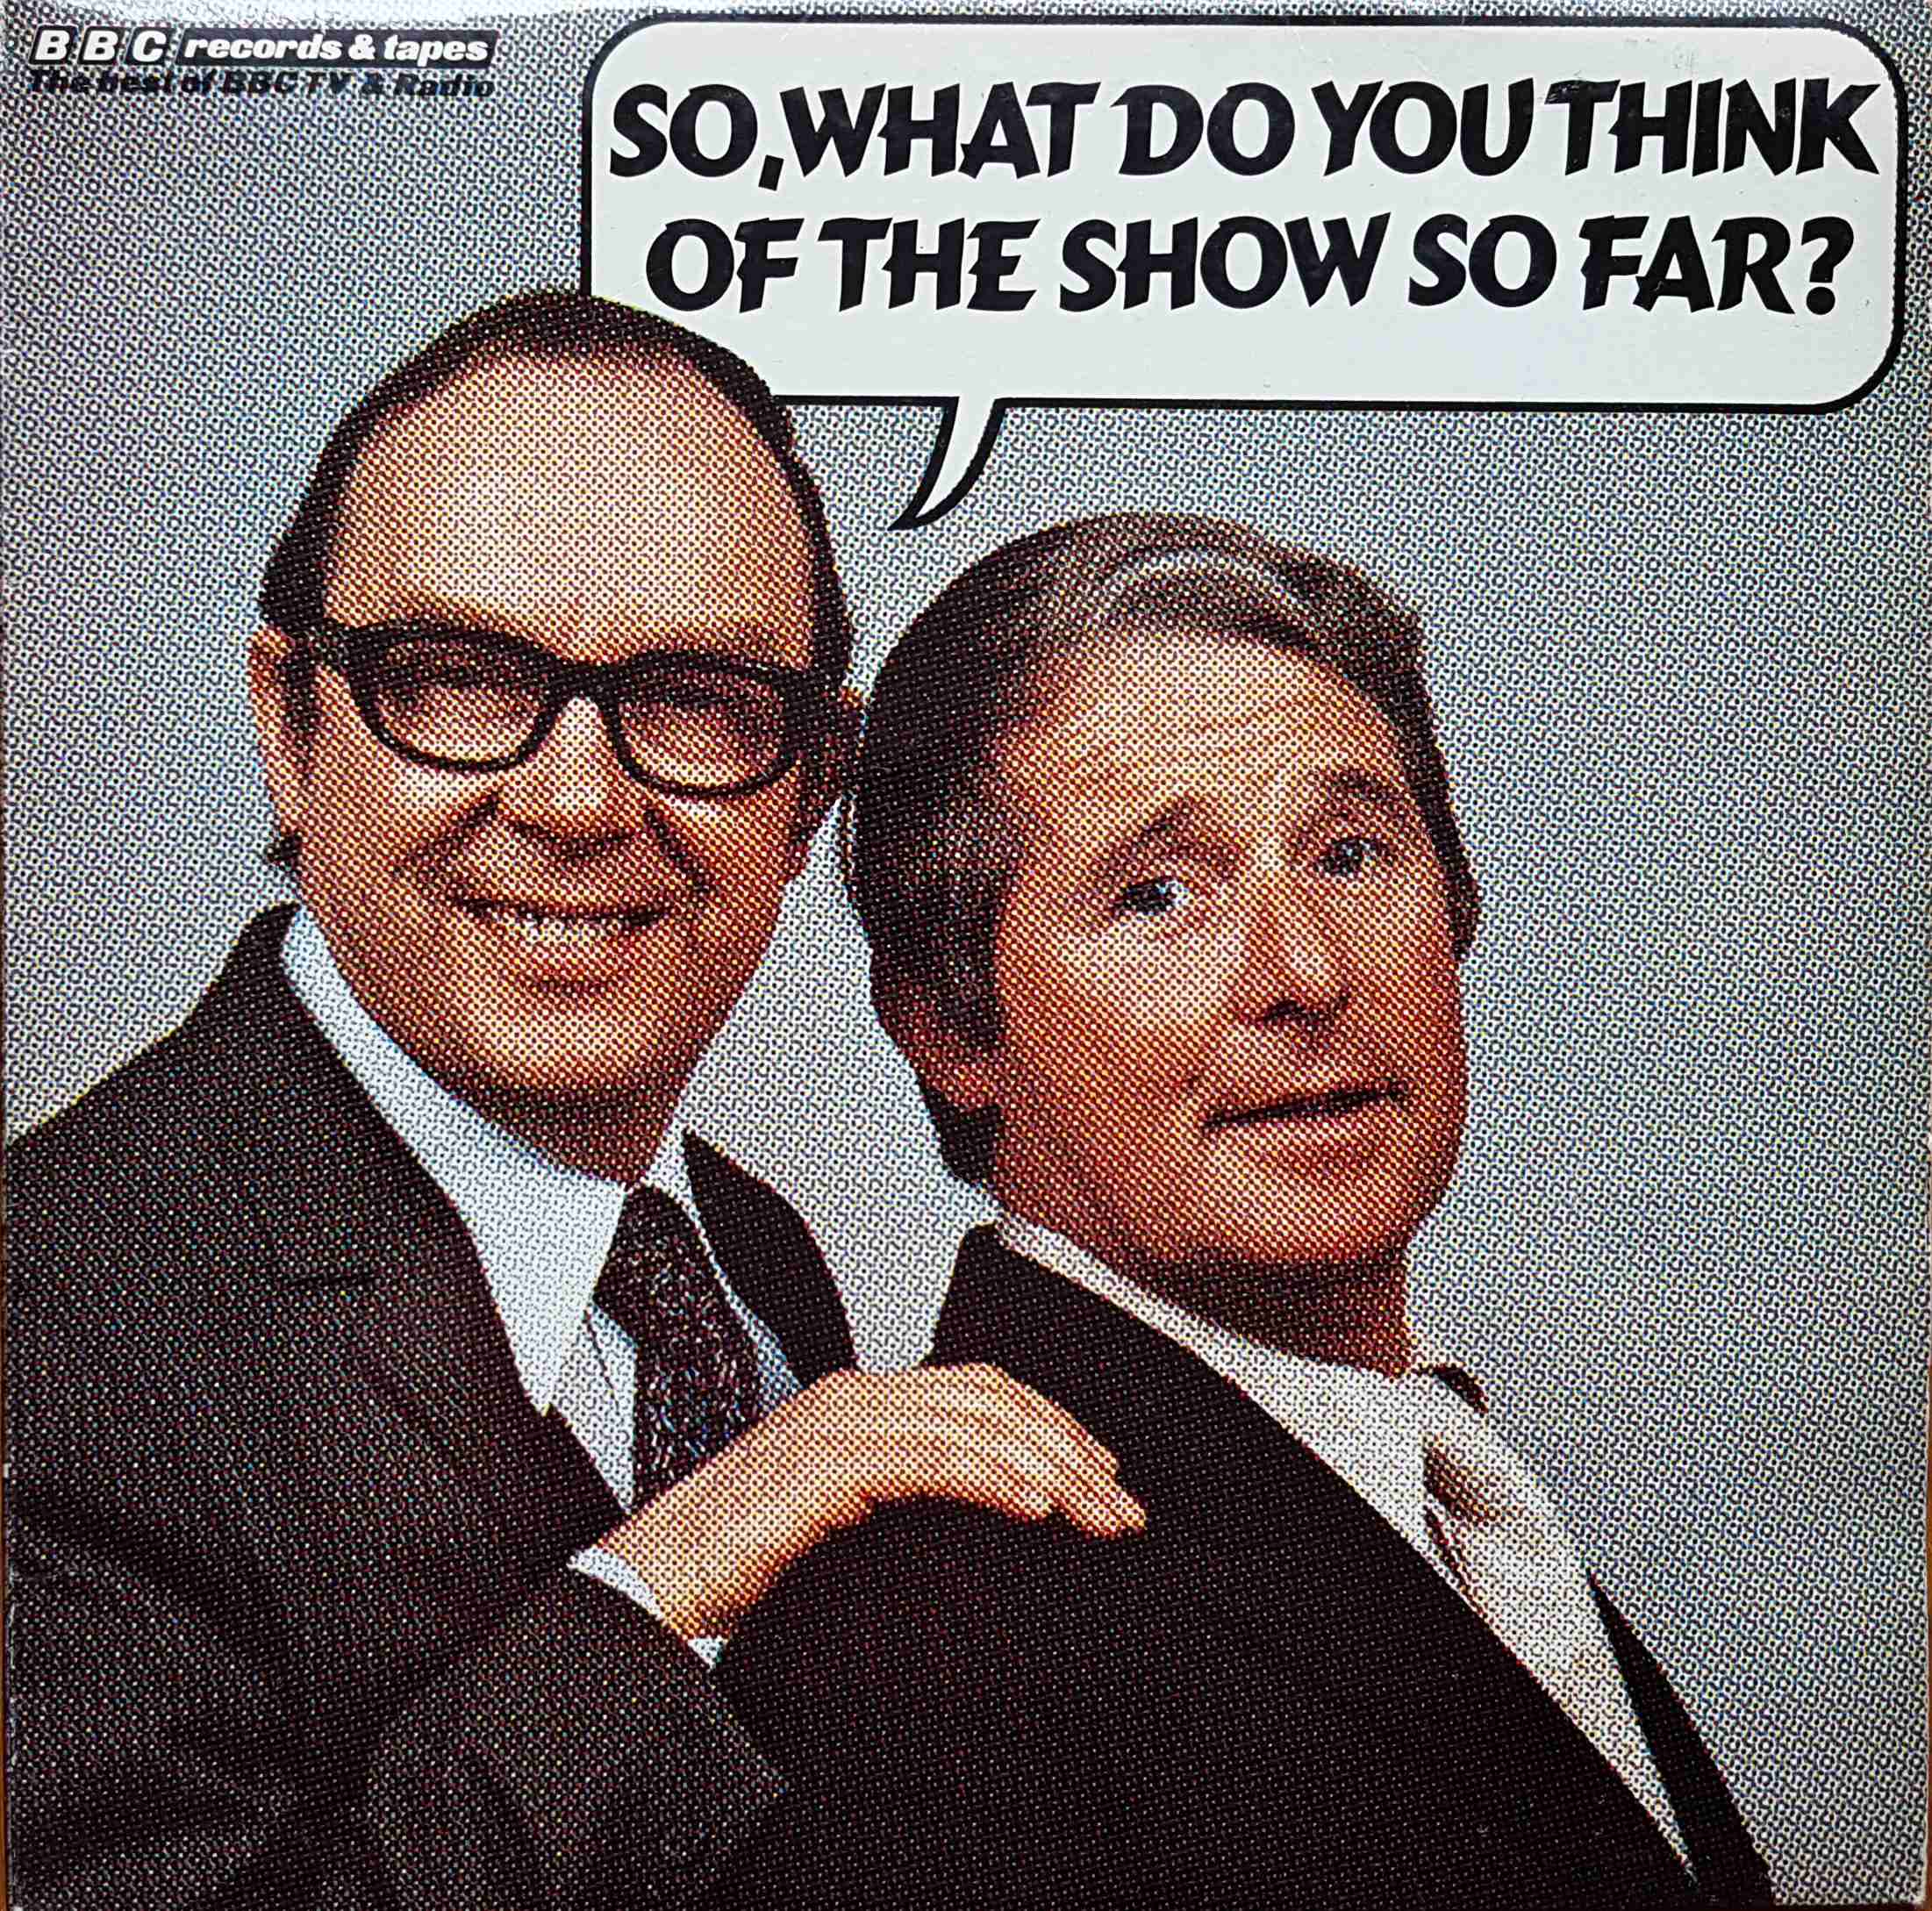 Picture of REB 210 So, what do you think of the show so far ? - Morecambe and Wise by artist Morecambe / Wise from the BBC albums - Records and Tapes library